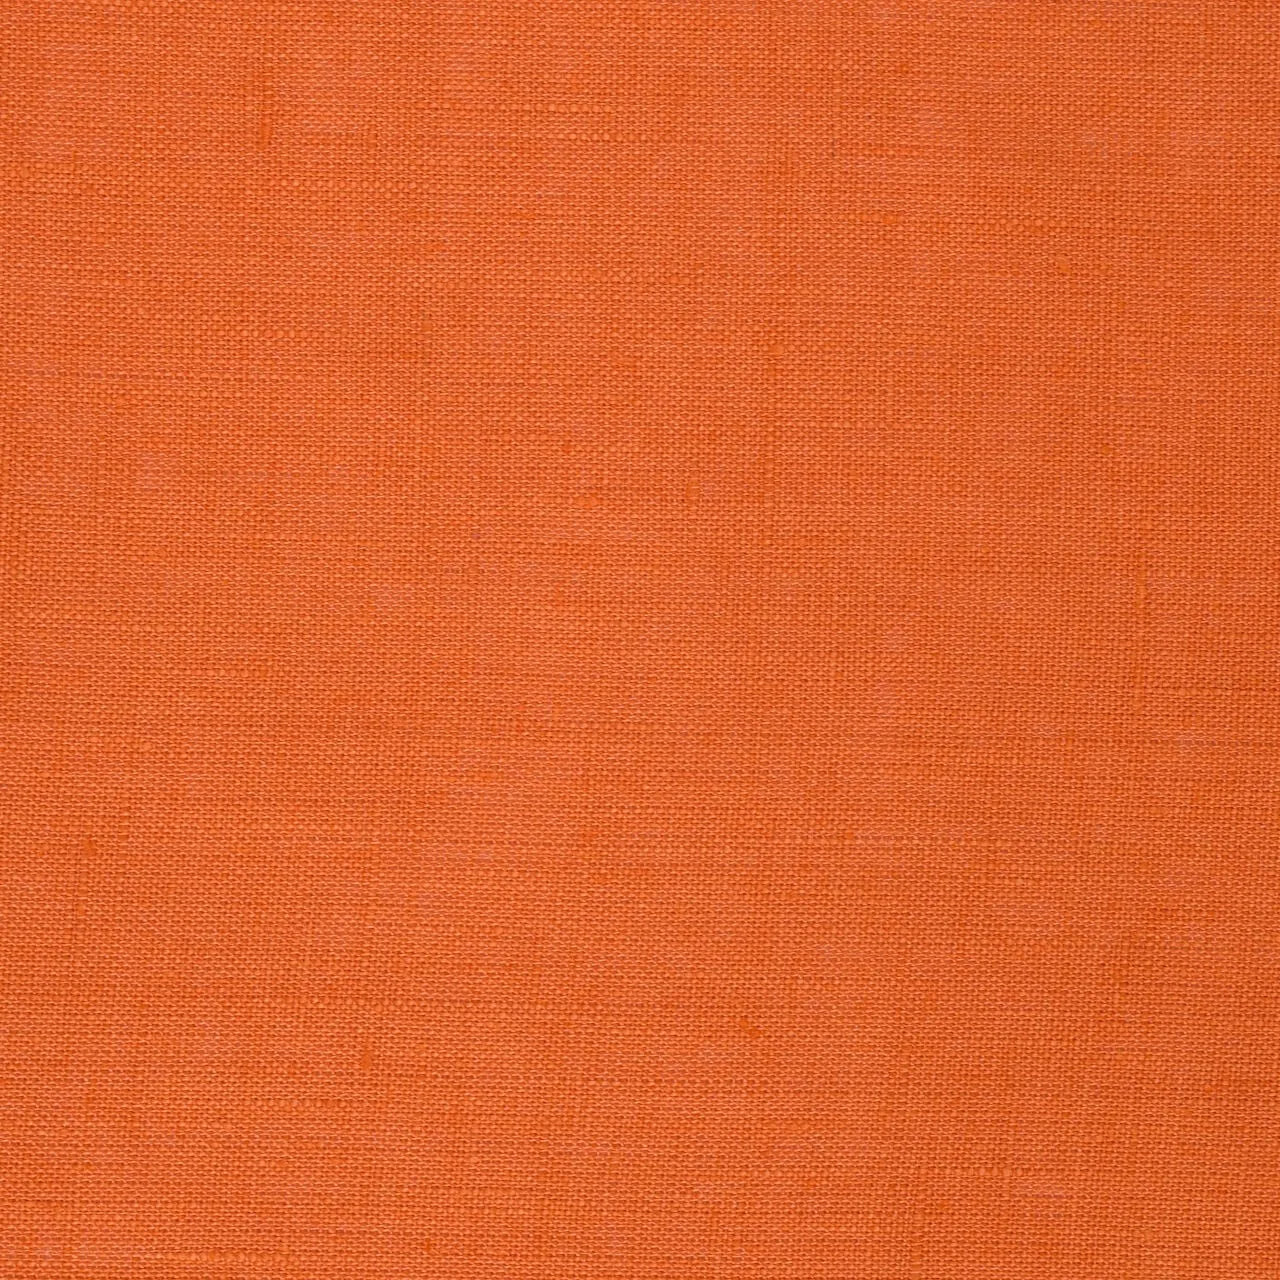 Washed Pure Tangerine Linen Fabric 205 g/m²